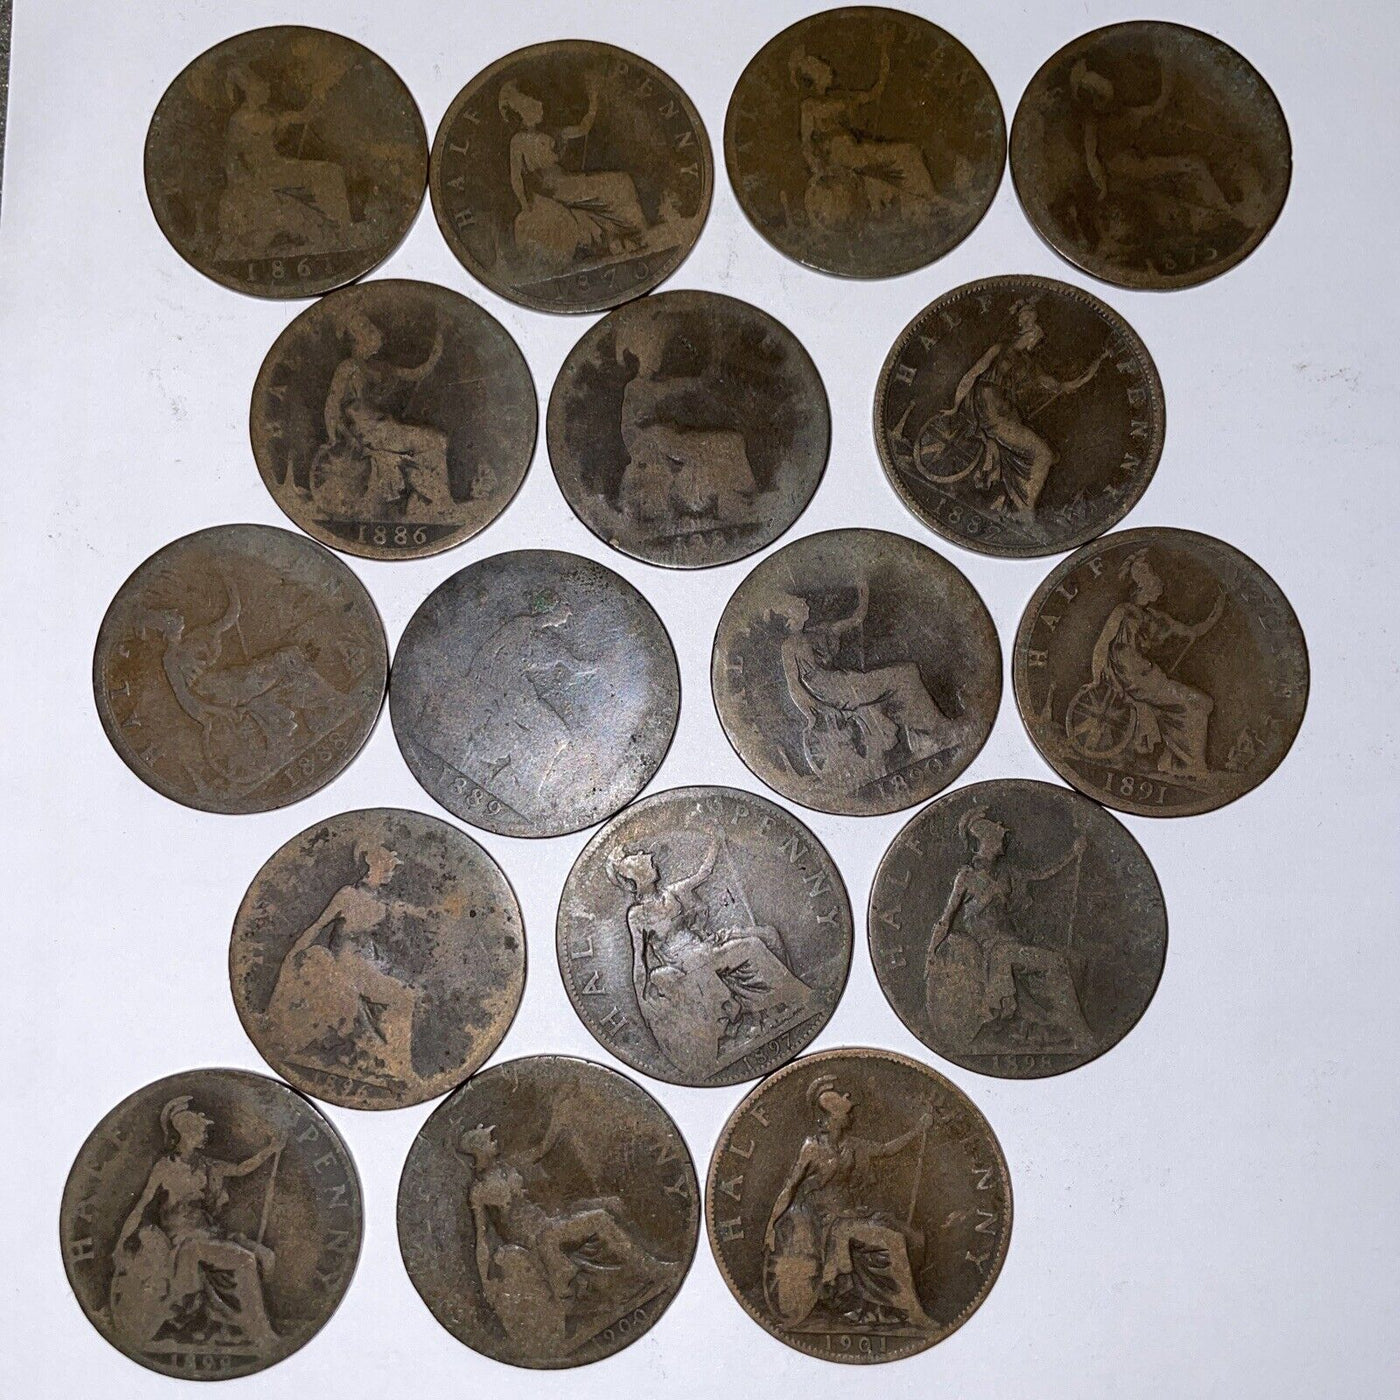 17 different English Half Penny Coppers nice collection 1861 to 1901 - US CoinSpot